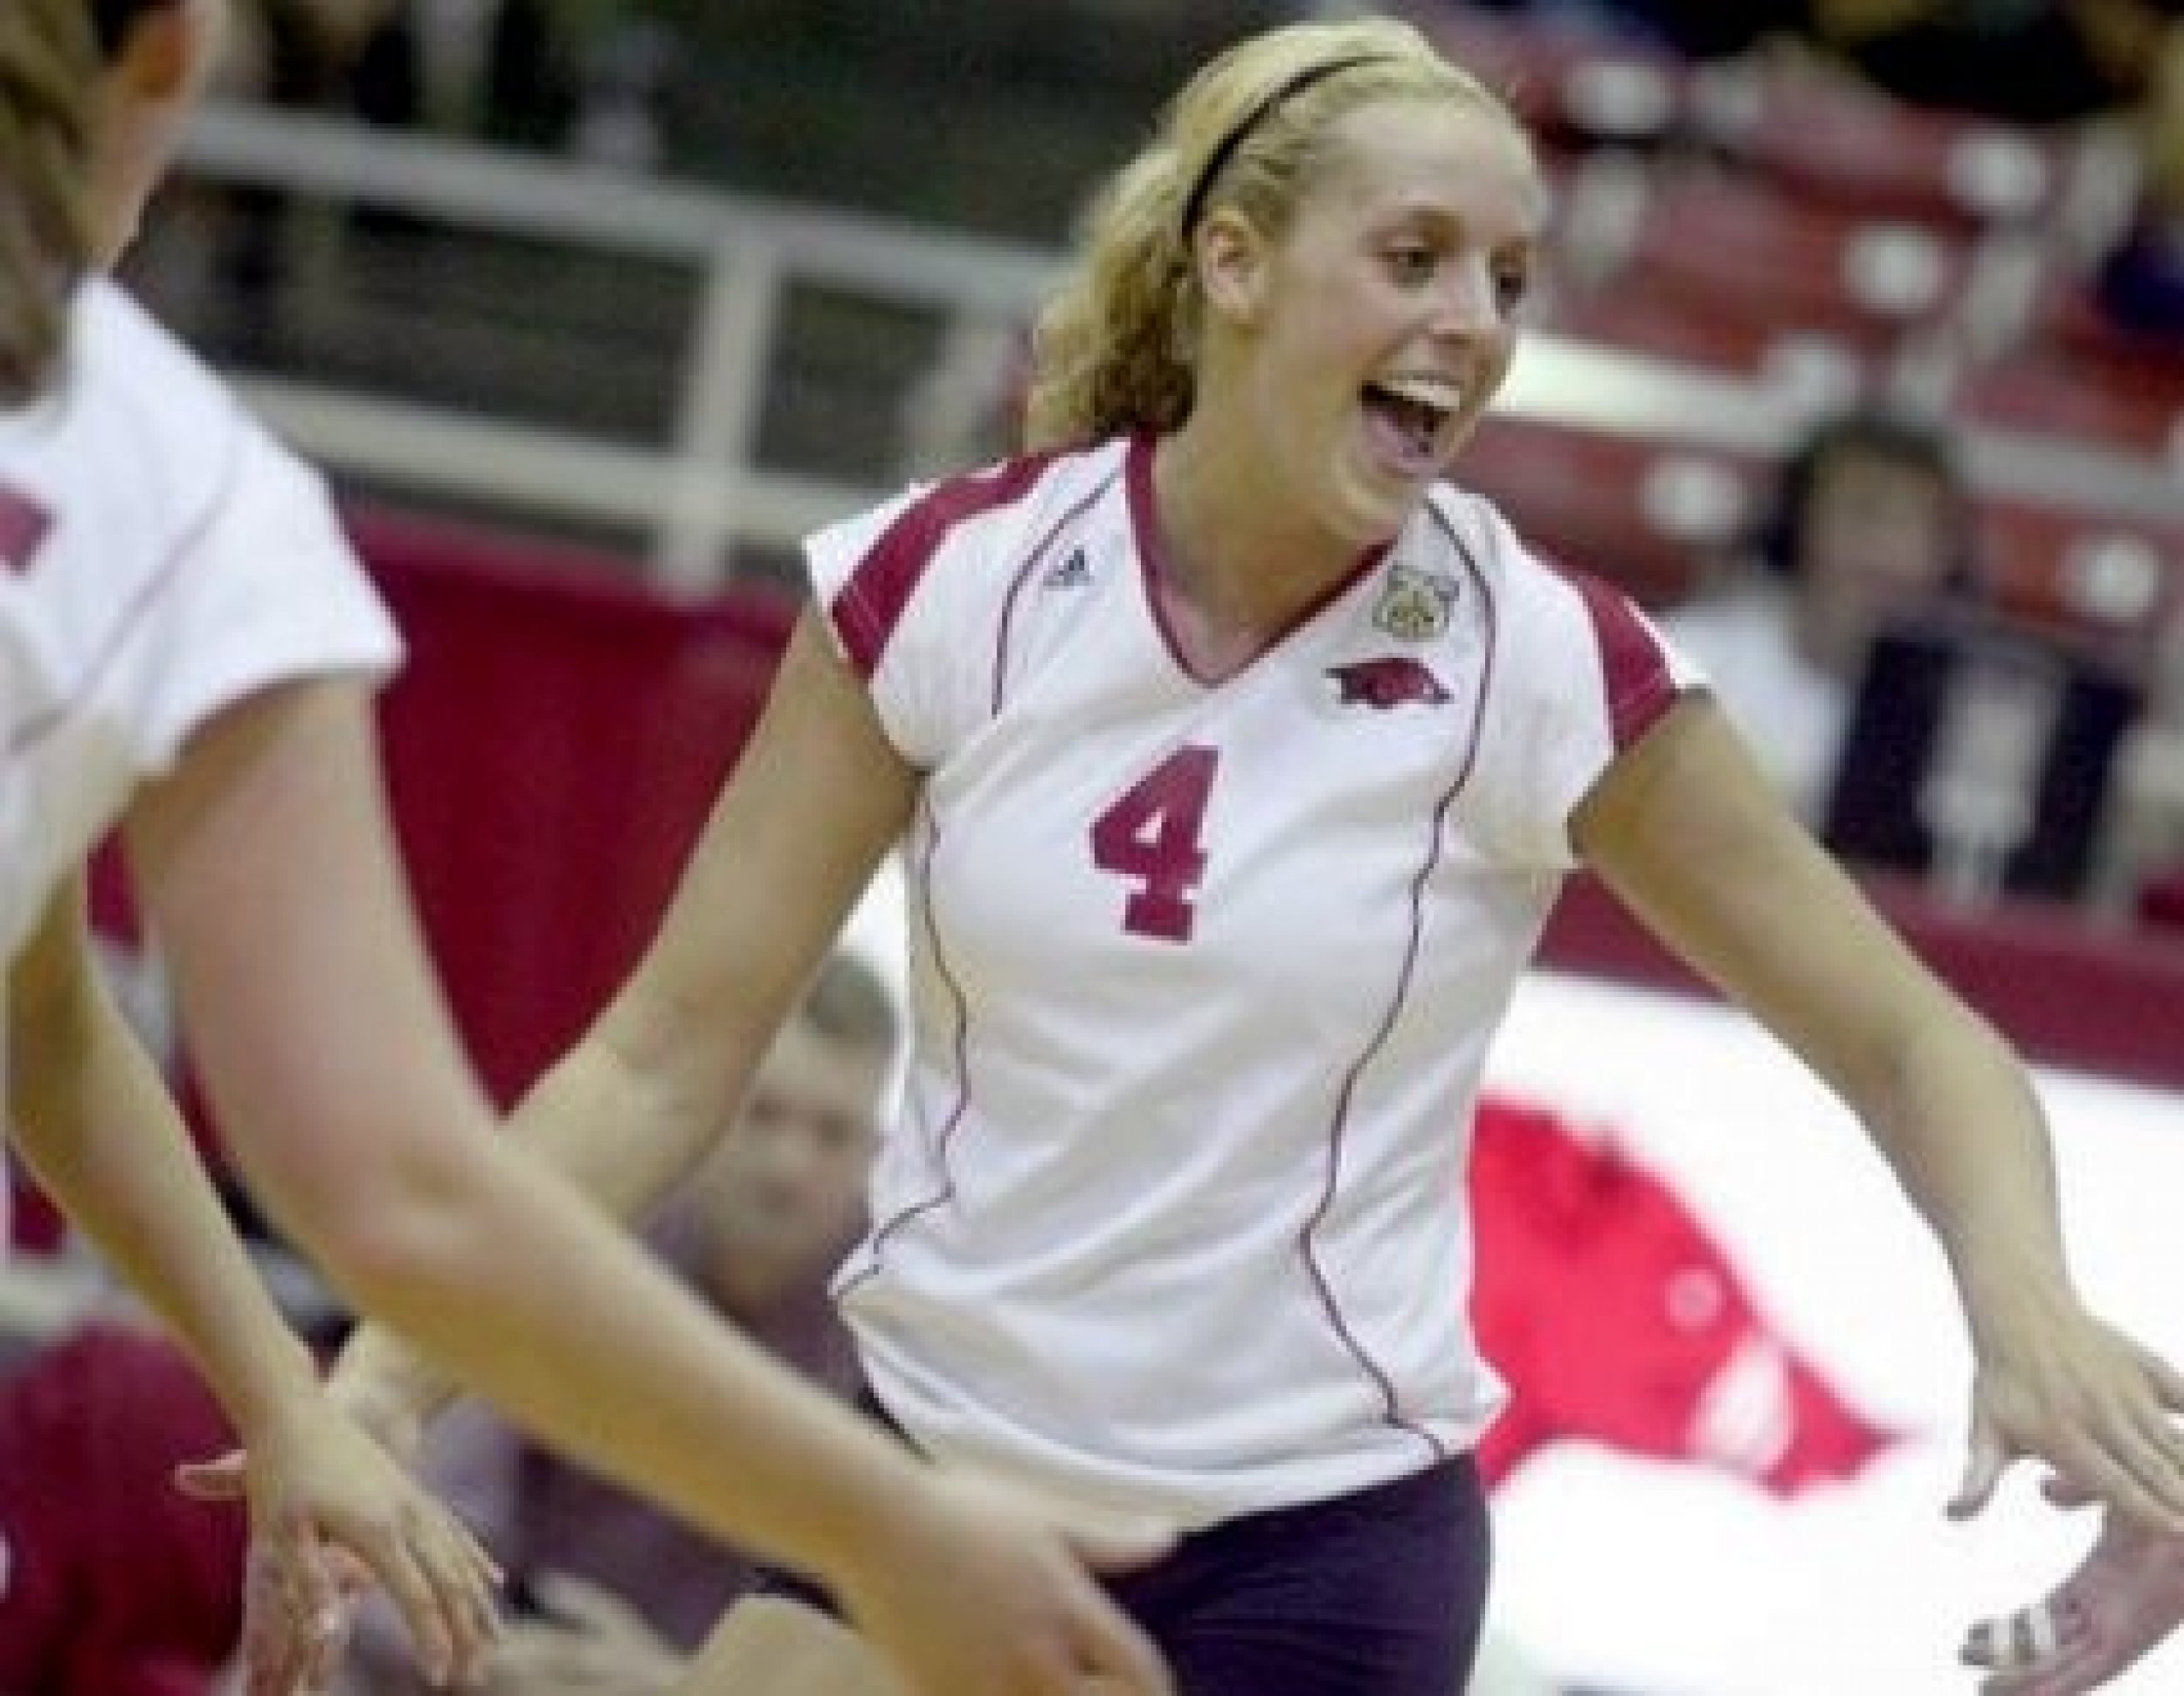 Dorrell was an All-SEC selection as a senior in 2007.